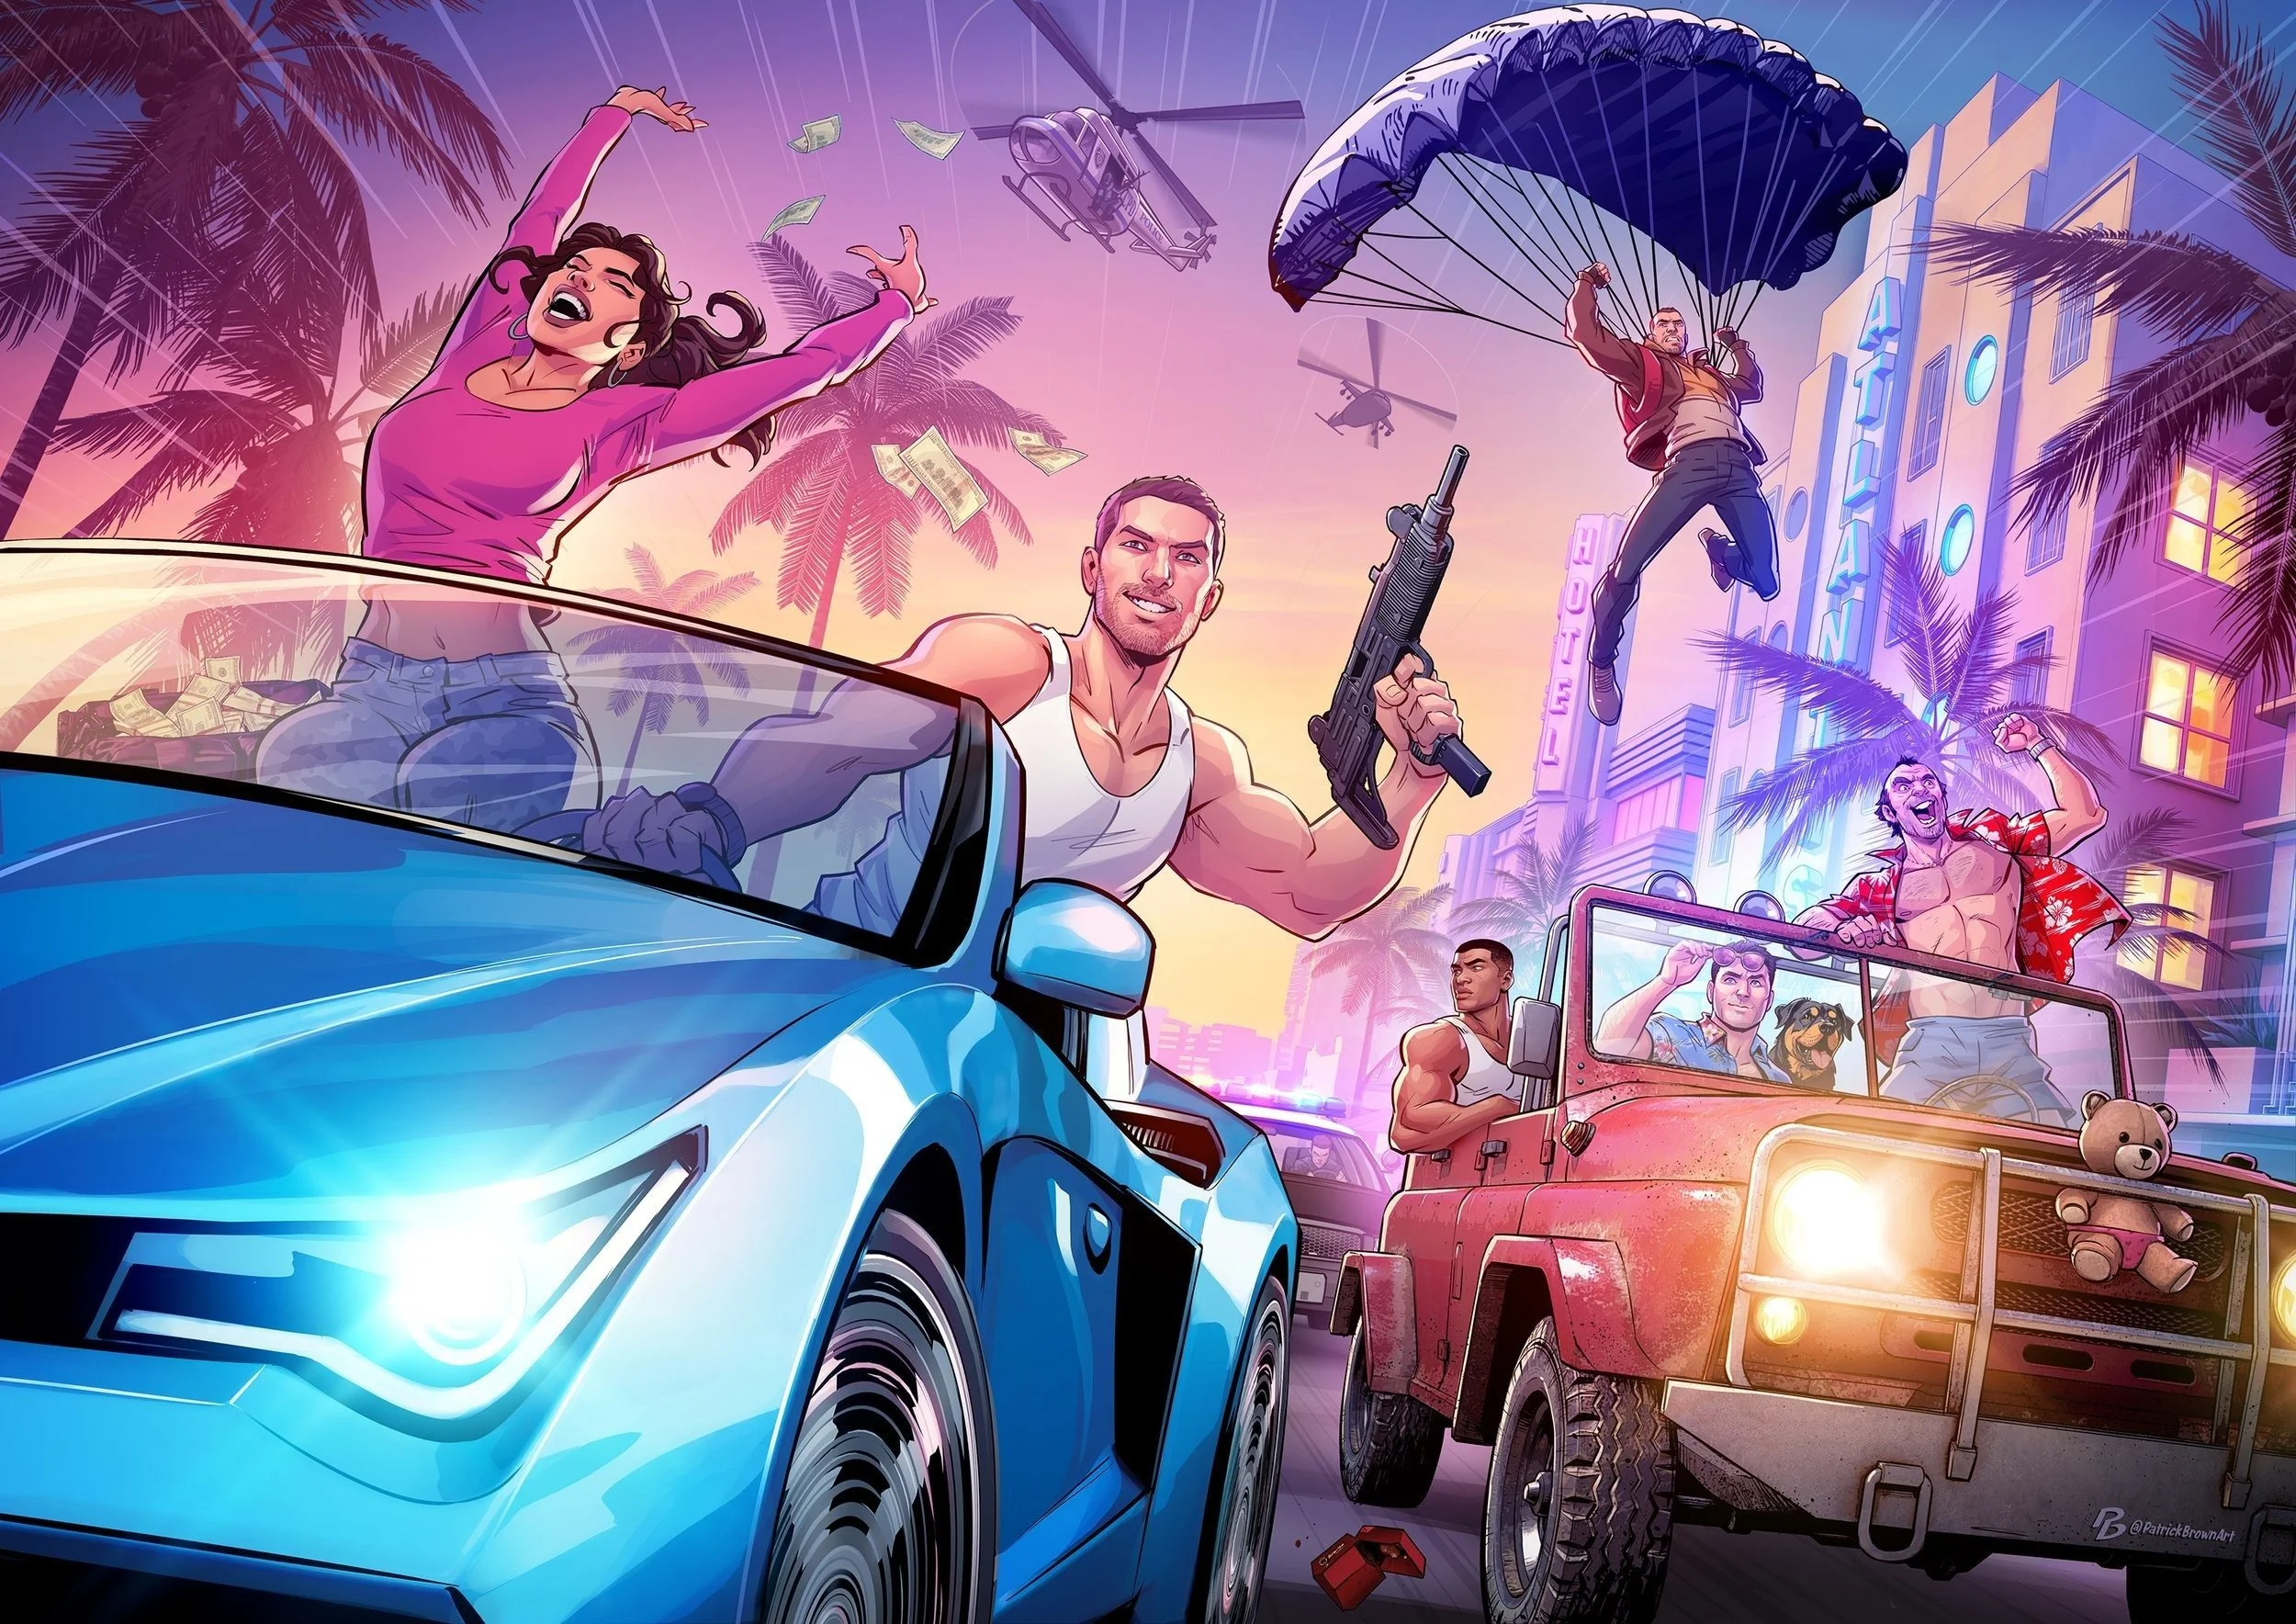 A Marvel artist created an art in which the main characters of GTA 4, GTA 5 and GTA 6 were in one place